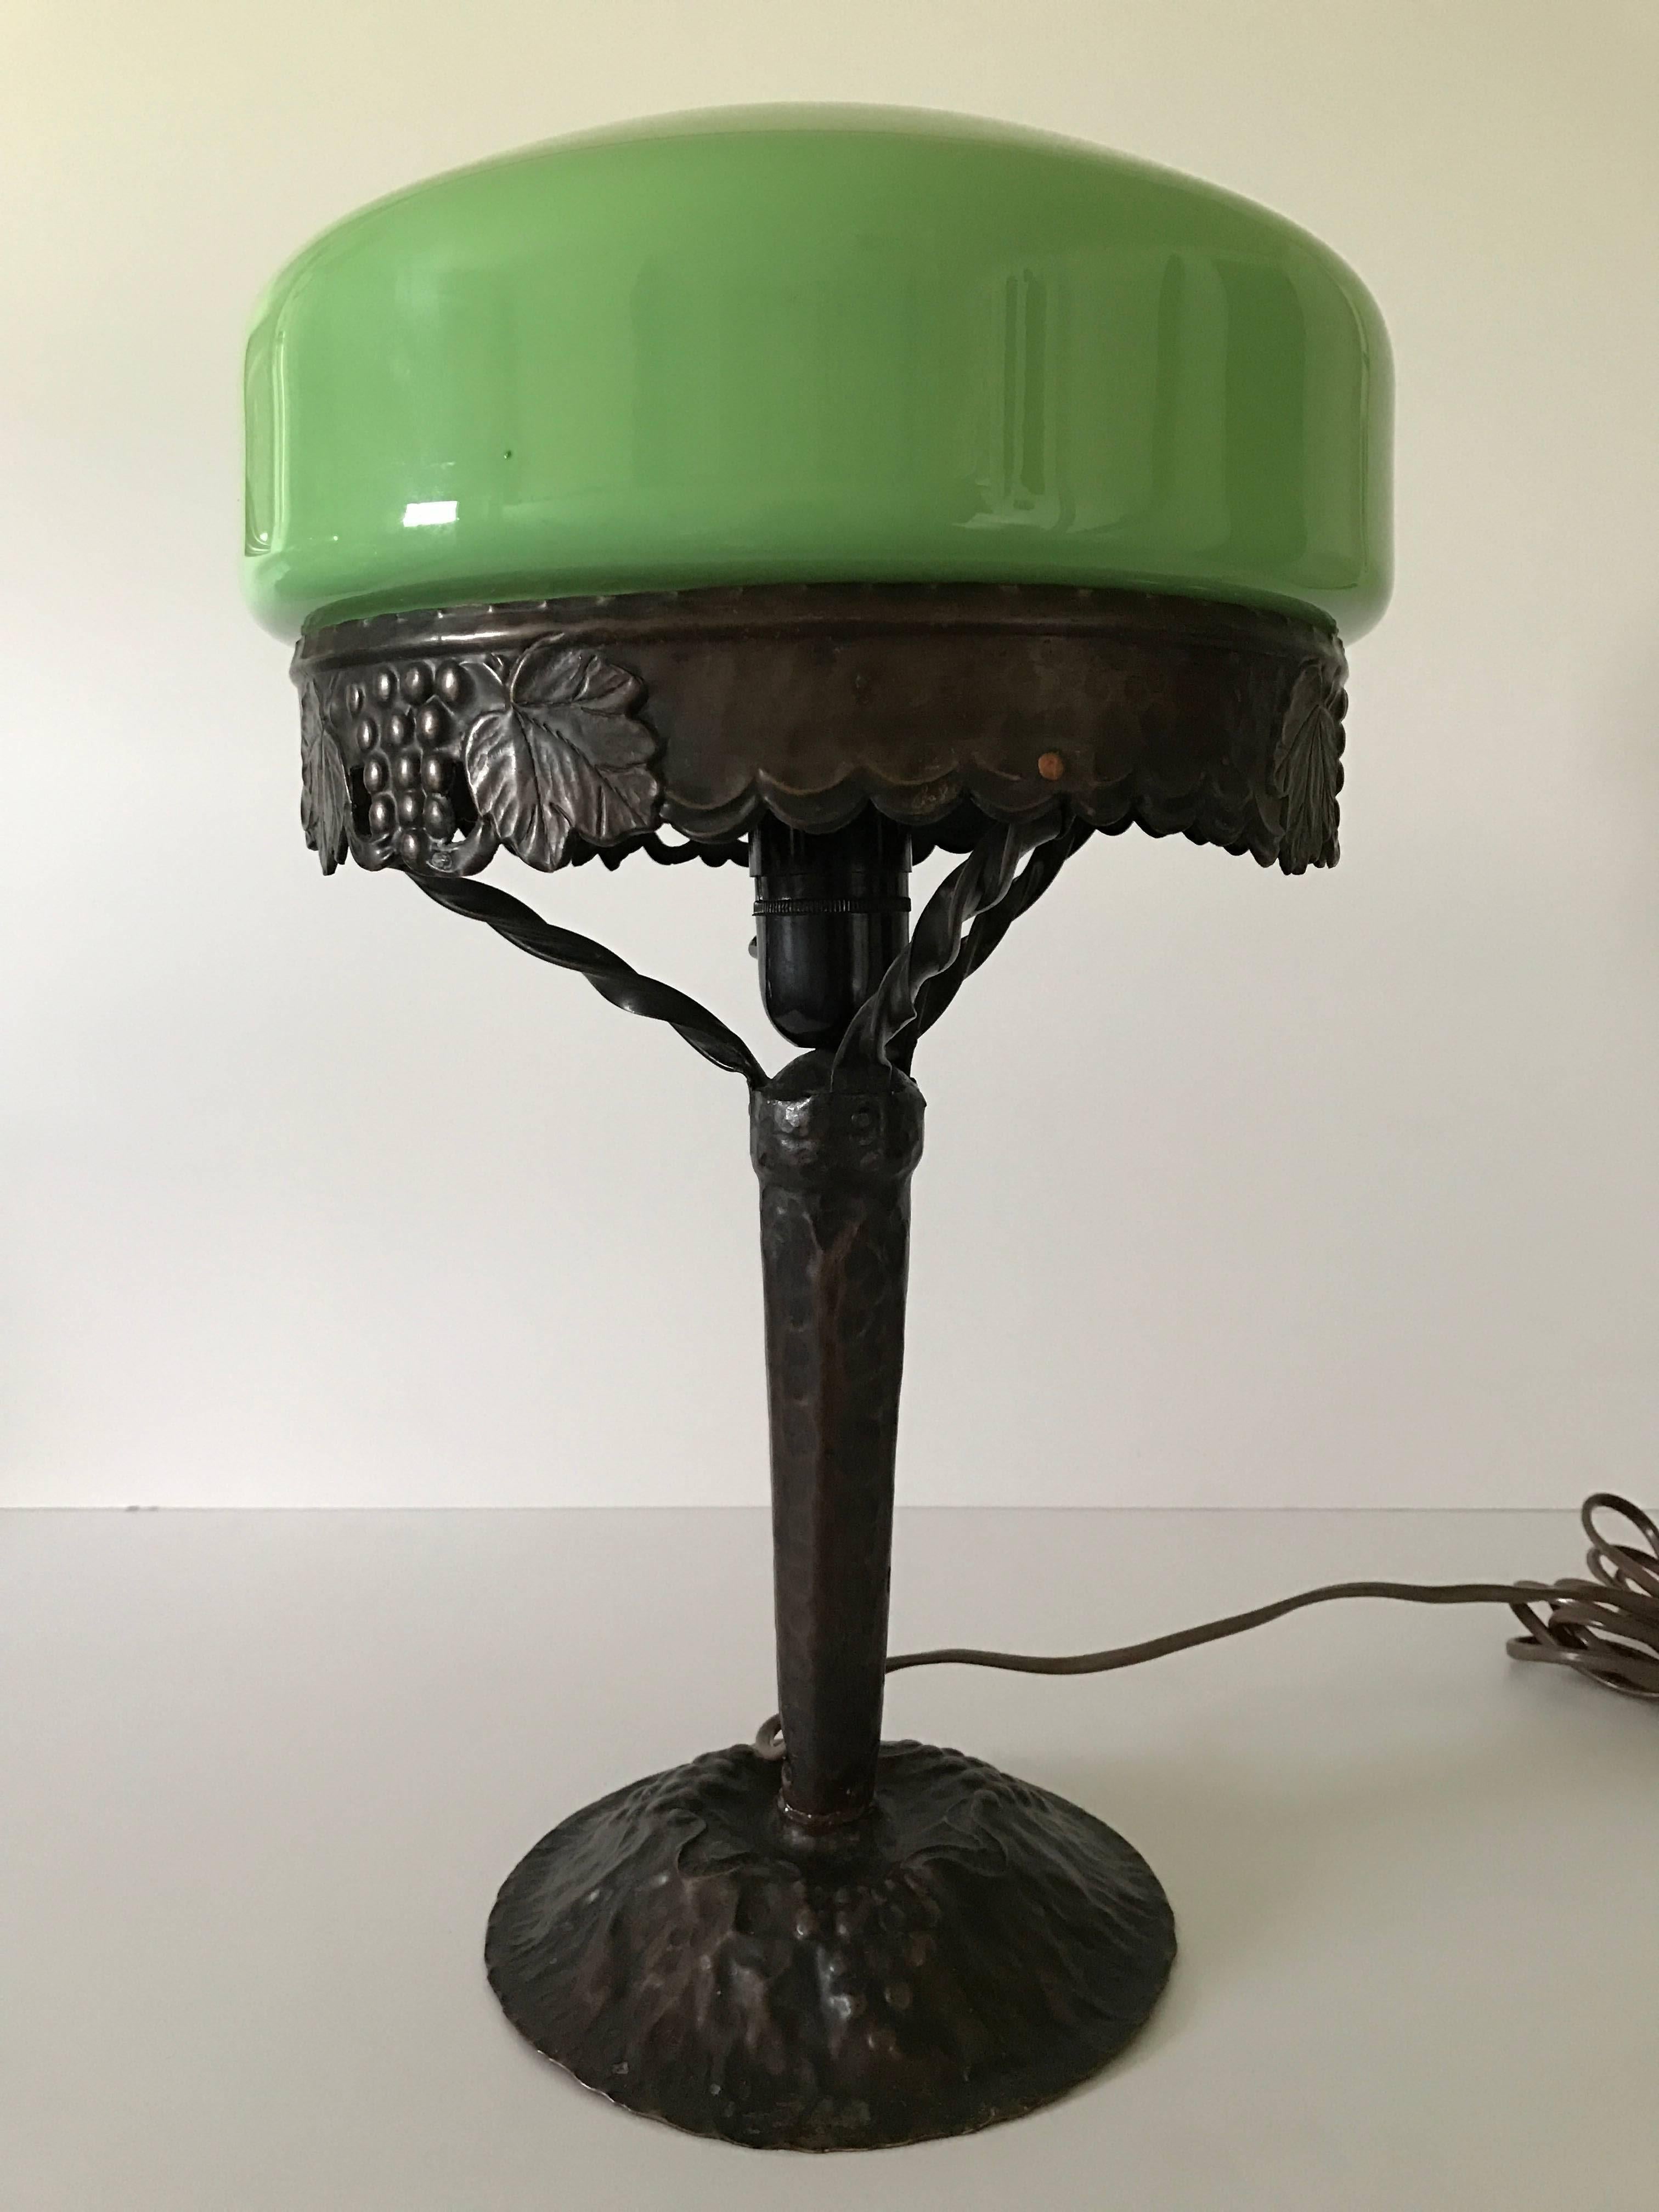 Early 20th century Swedish Art Nouveau Jugend copper and glass table lamp.
A nice large copper jugend/Art Nouveau table lamp made circa 1910-1915.
This lamp has a nice clear green glass lampshade most likely made at Pukeberg, Sweden. The lamp is